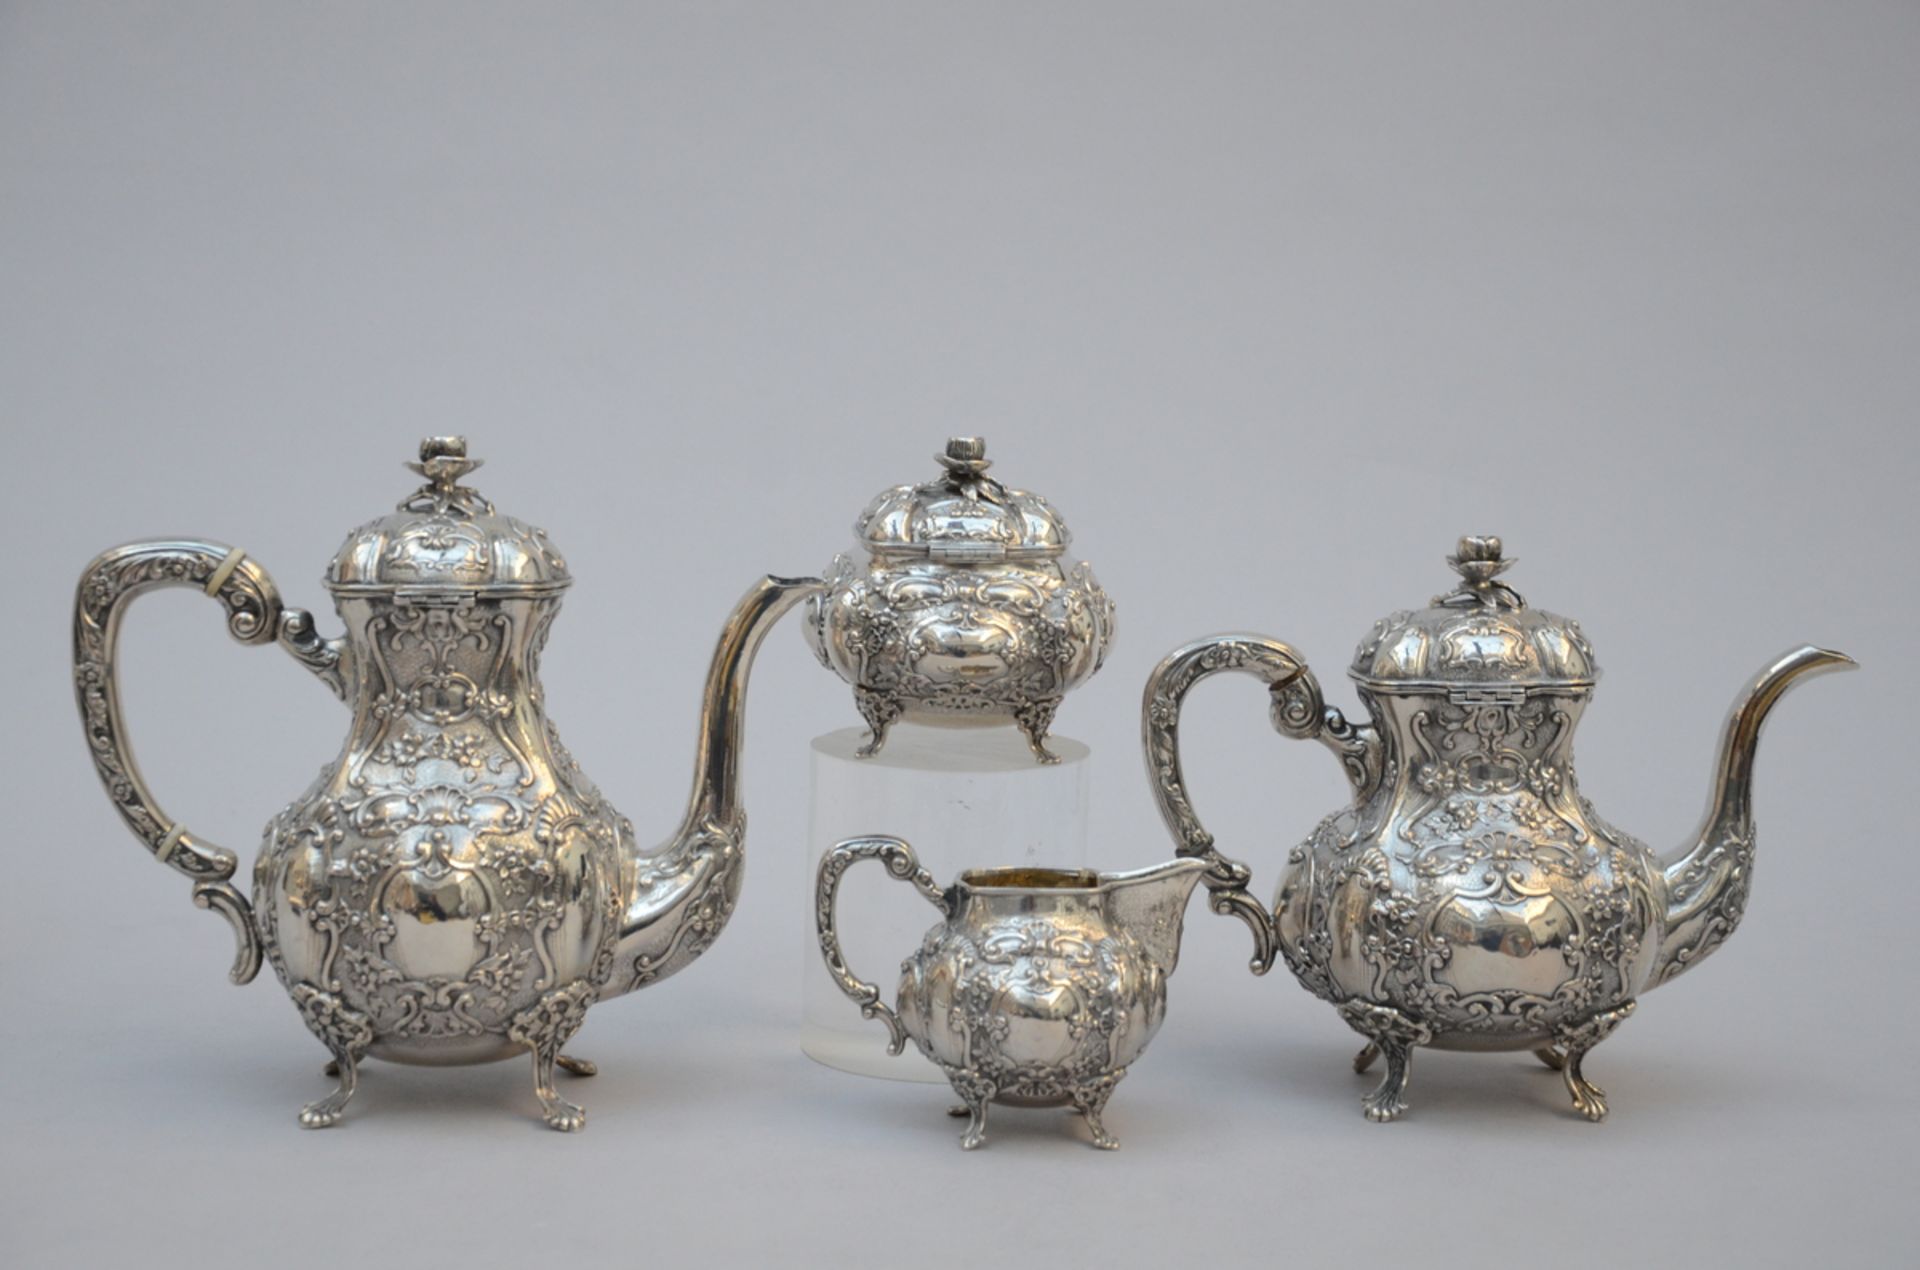 A silver coffee set, Rococo style (830/1000) - Image 2 of 5